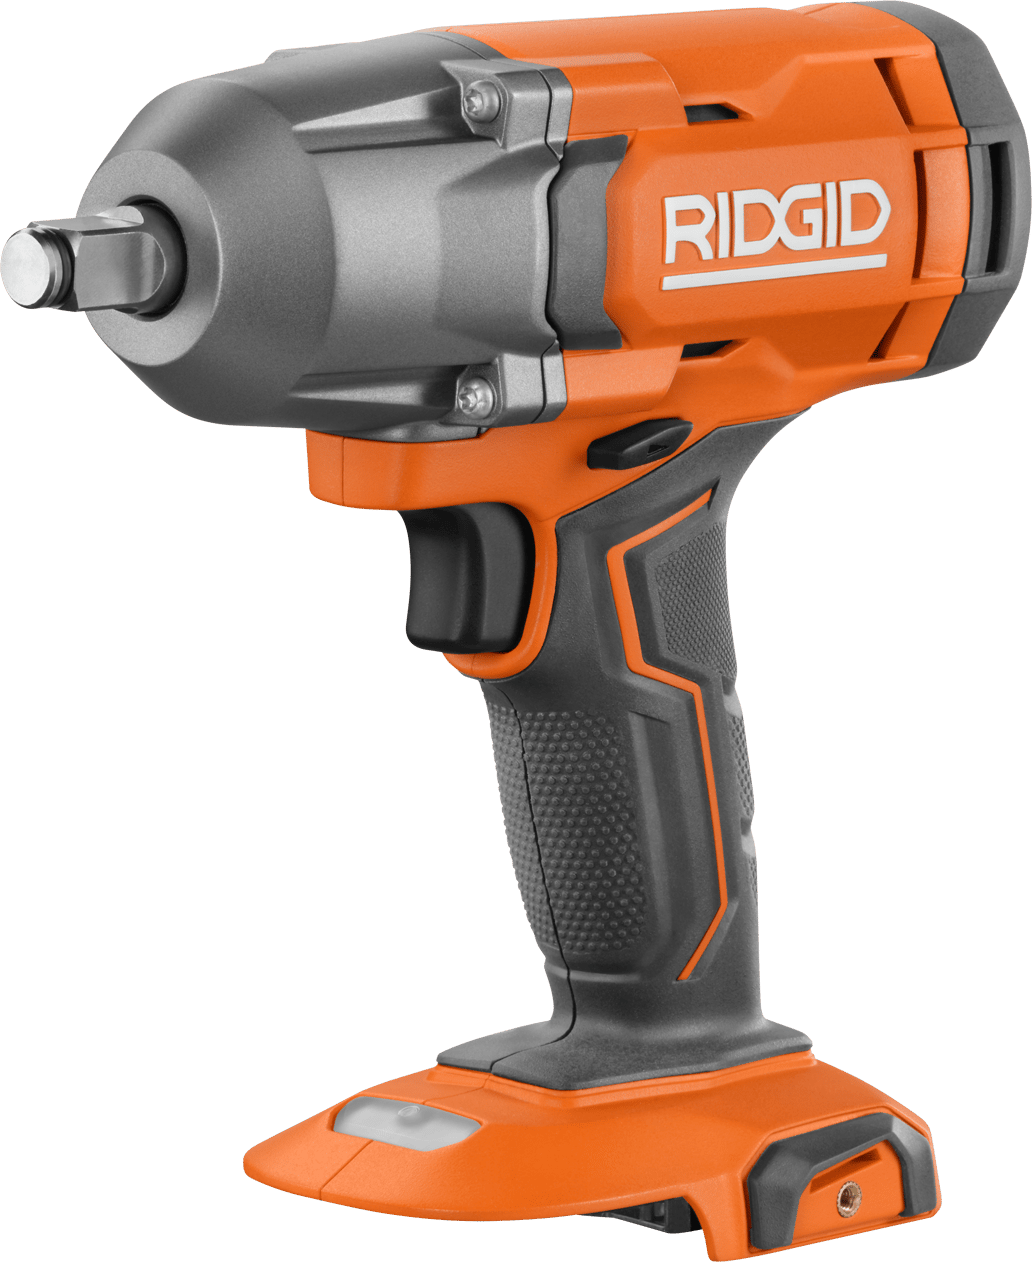 Handheld power drill, Pneumatic tool, Product